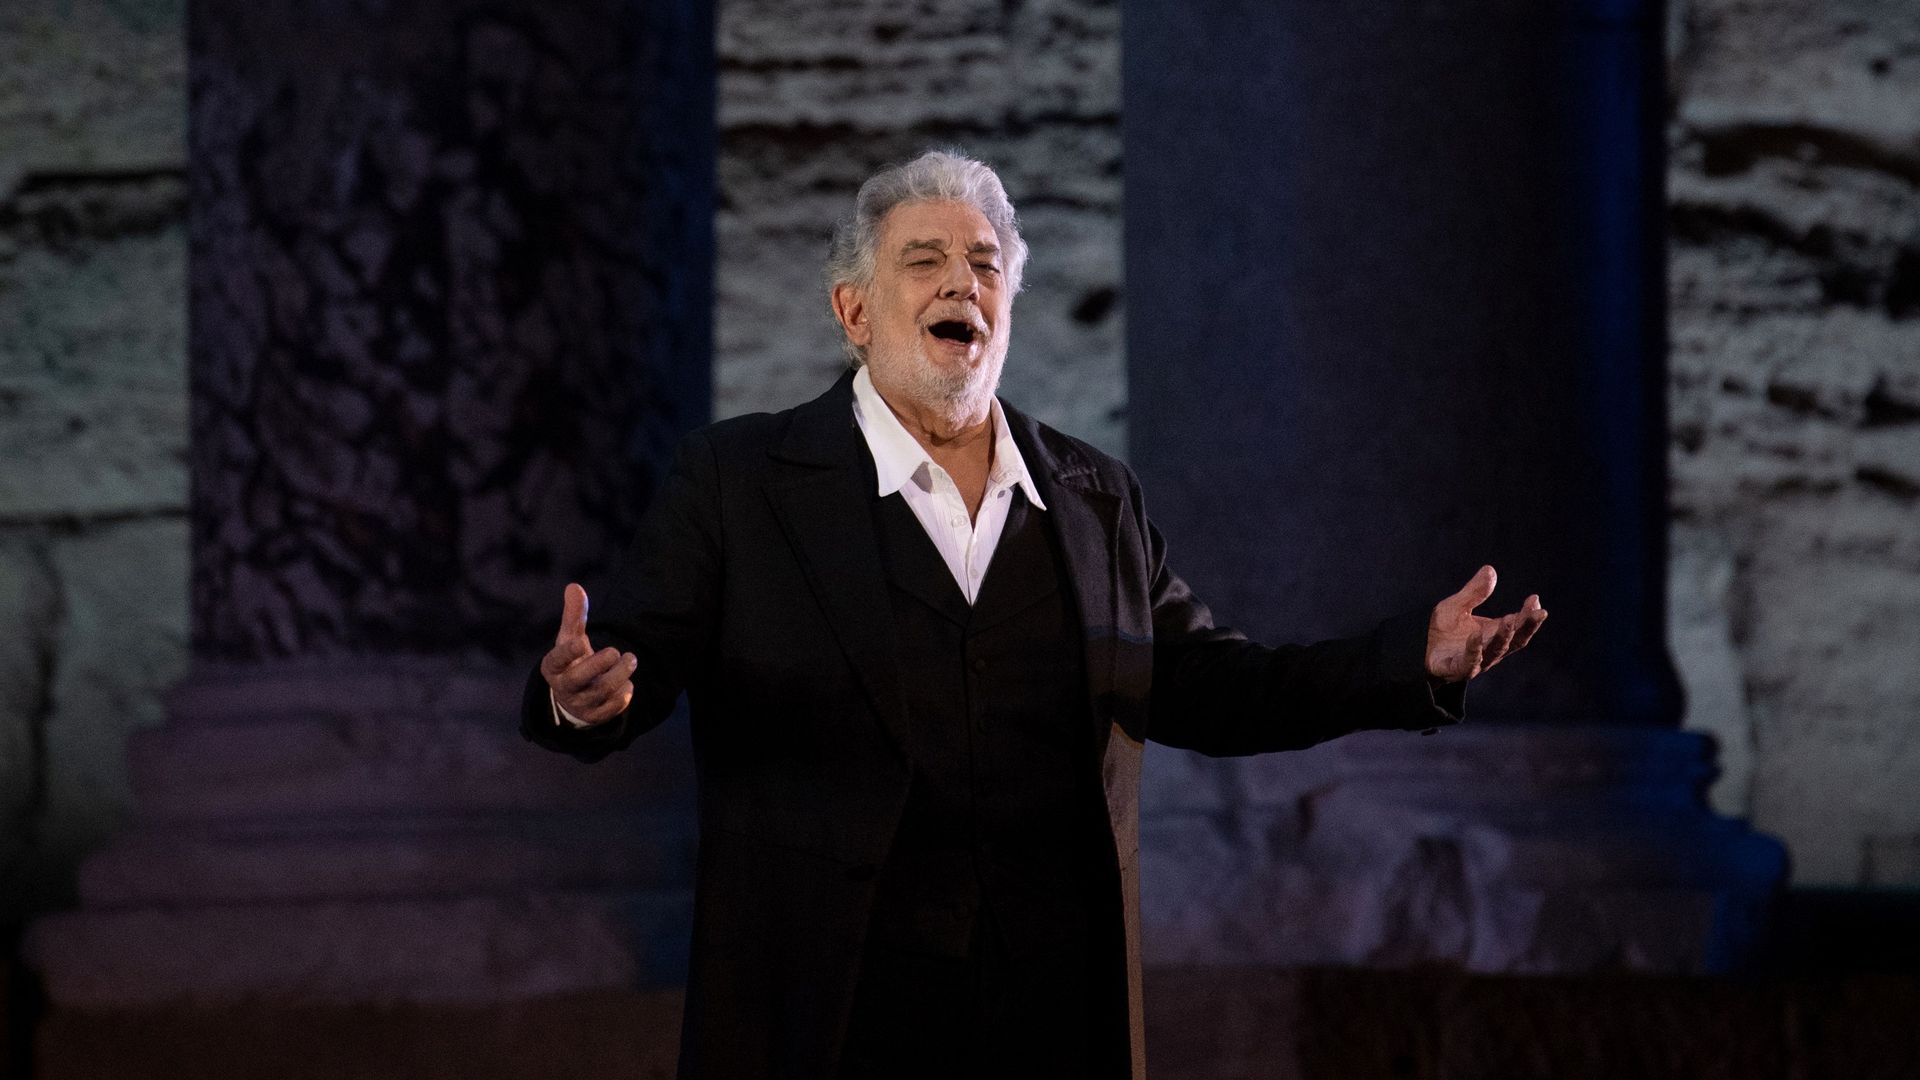 Spanish opera singer Placido Domingo, 78, performs on stage during the dress rehearsal of "Spanish Night" at the 150th Choregie in Orange on 5 July